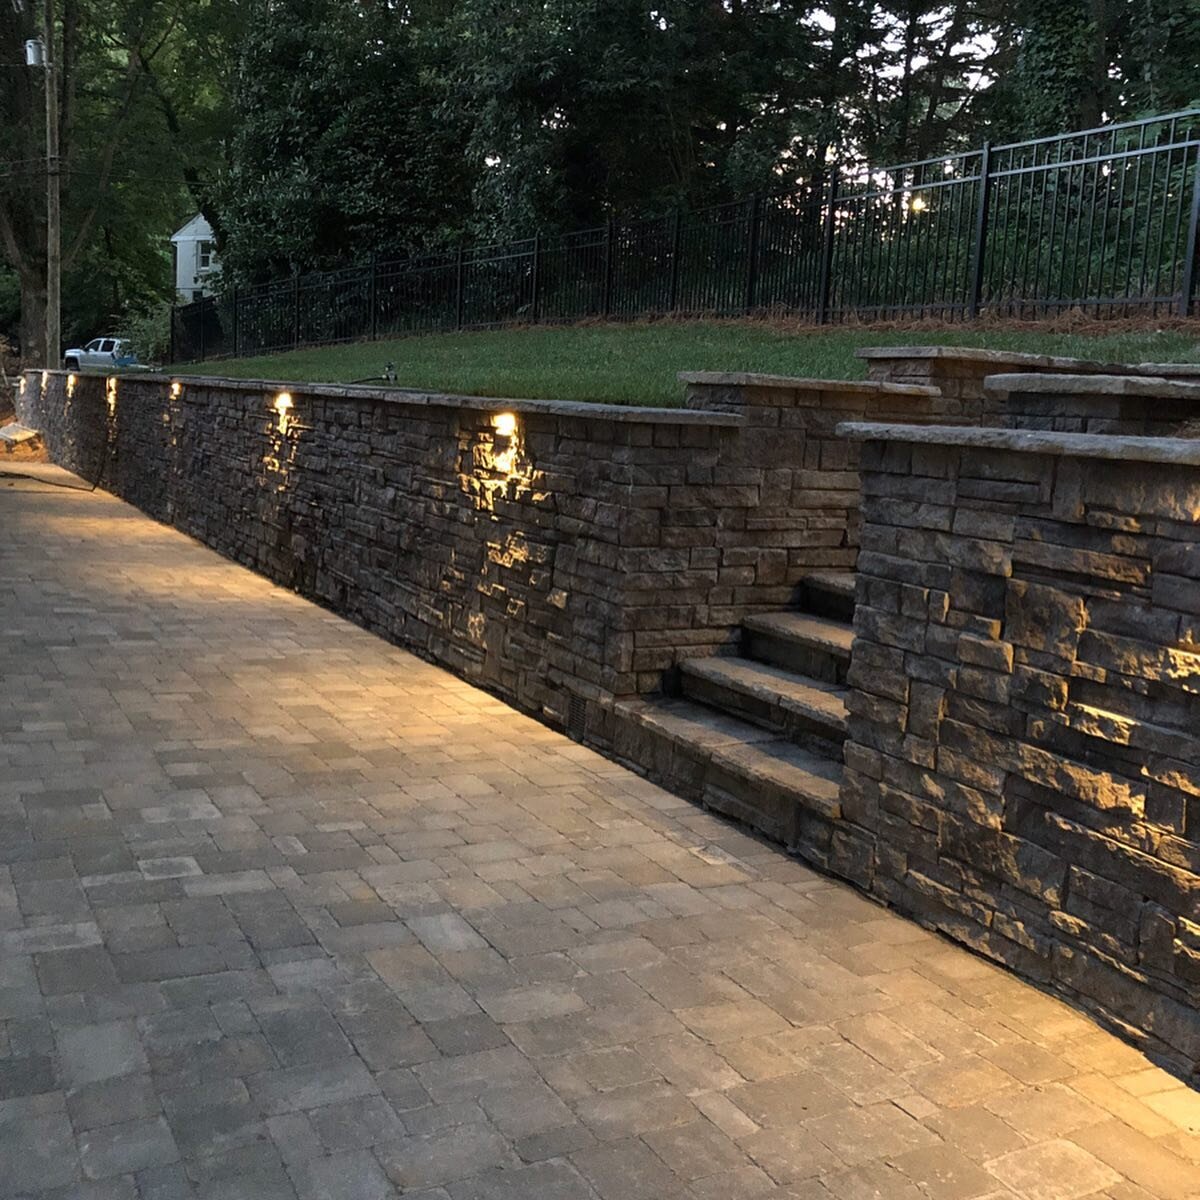 This retaining wall replacement project was an existing brick wall that had failed due to a lack of drainage behind the wall. The project included; New engineered Heritage block retaining wall, Belgard paver patio, bringing everything up to code, mak